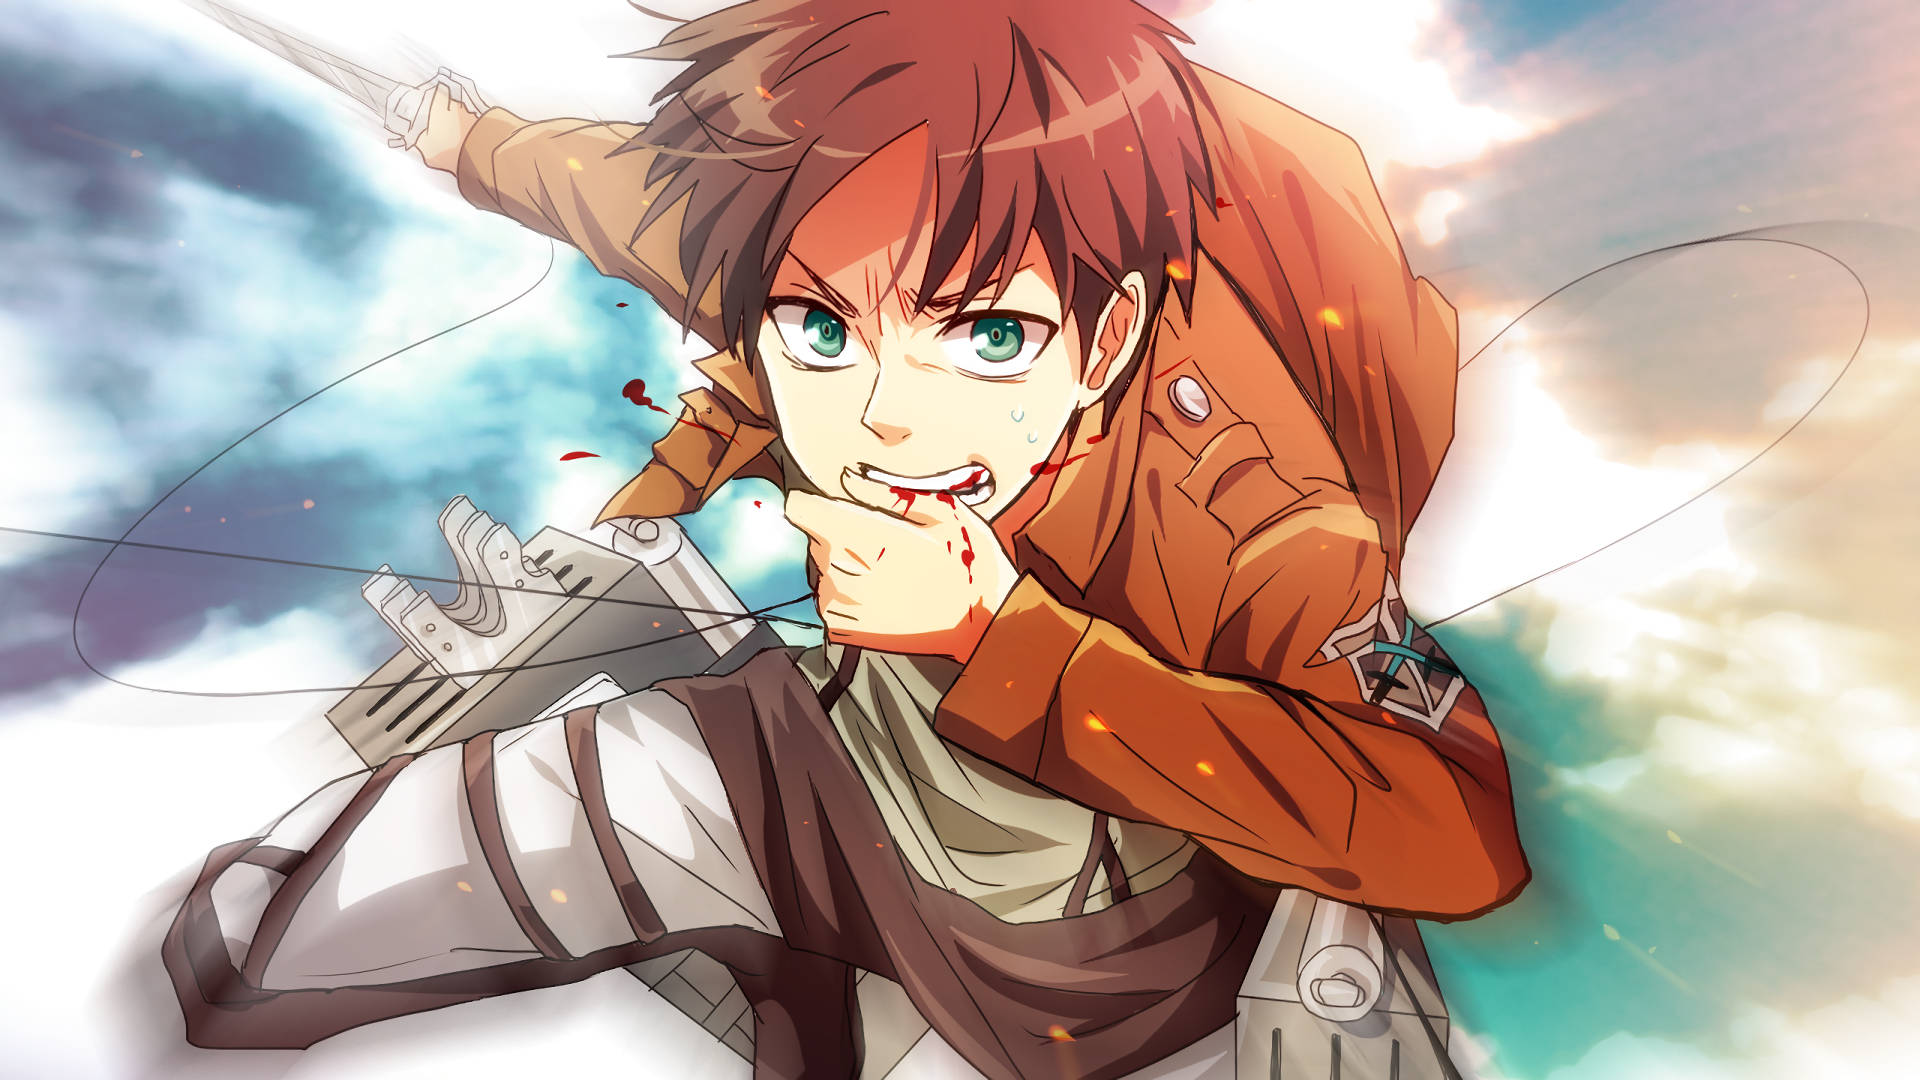 Young Eren Yeager Biting His Hand Wallpaper